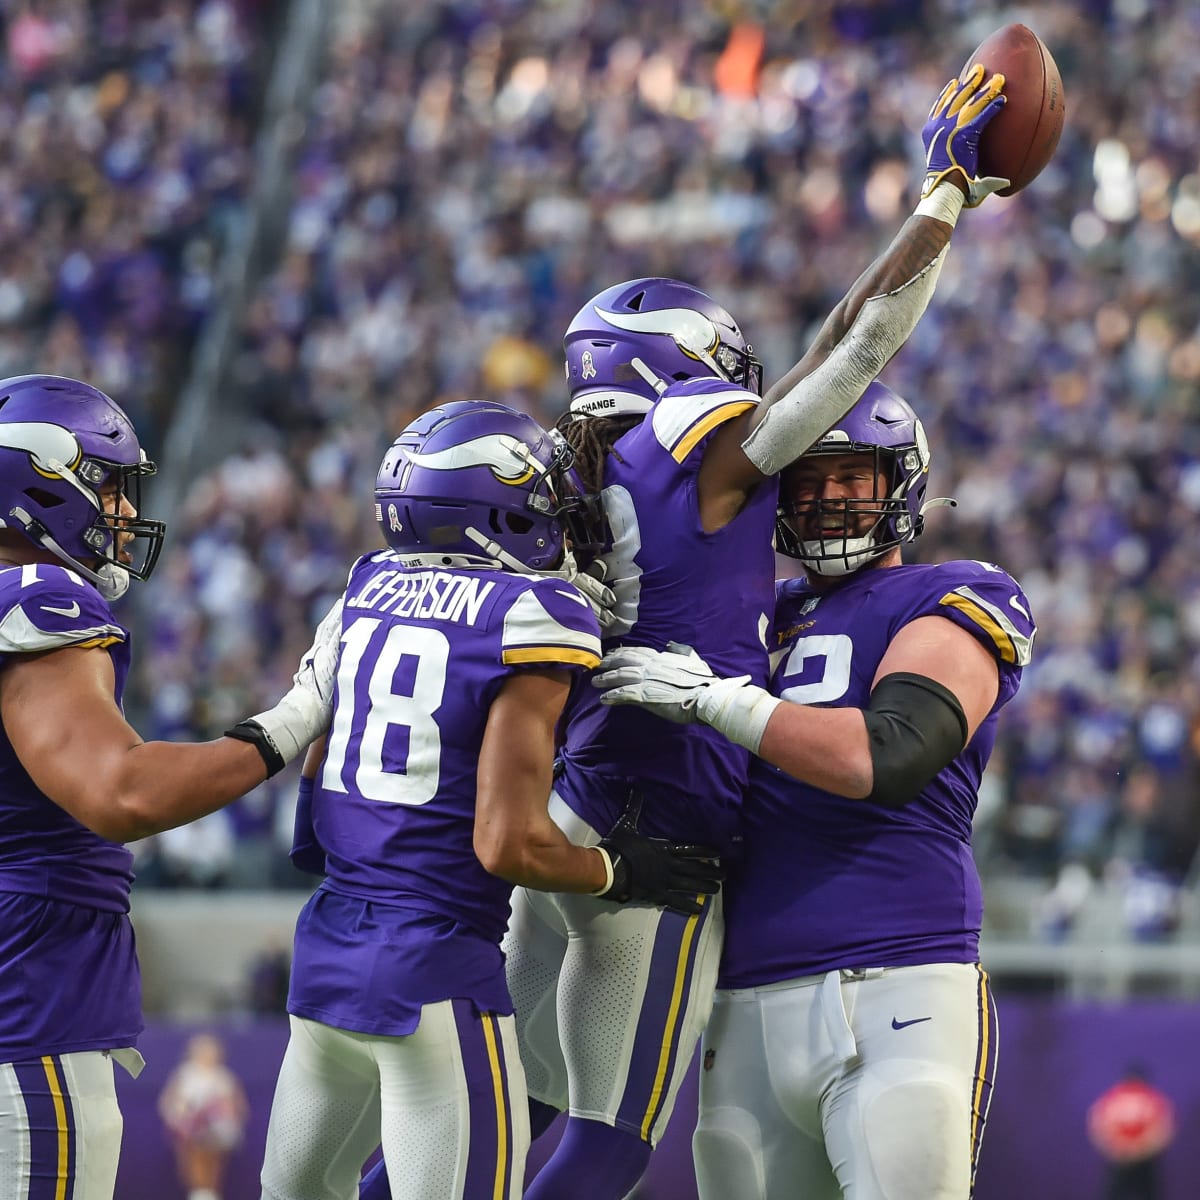 Vikings Playoff Schedule 2022 (opponents, dates, and times for